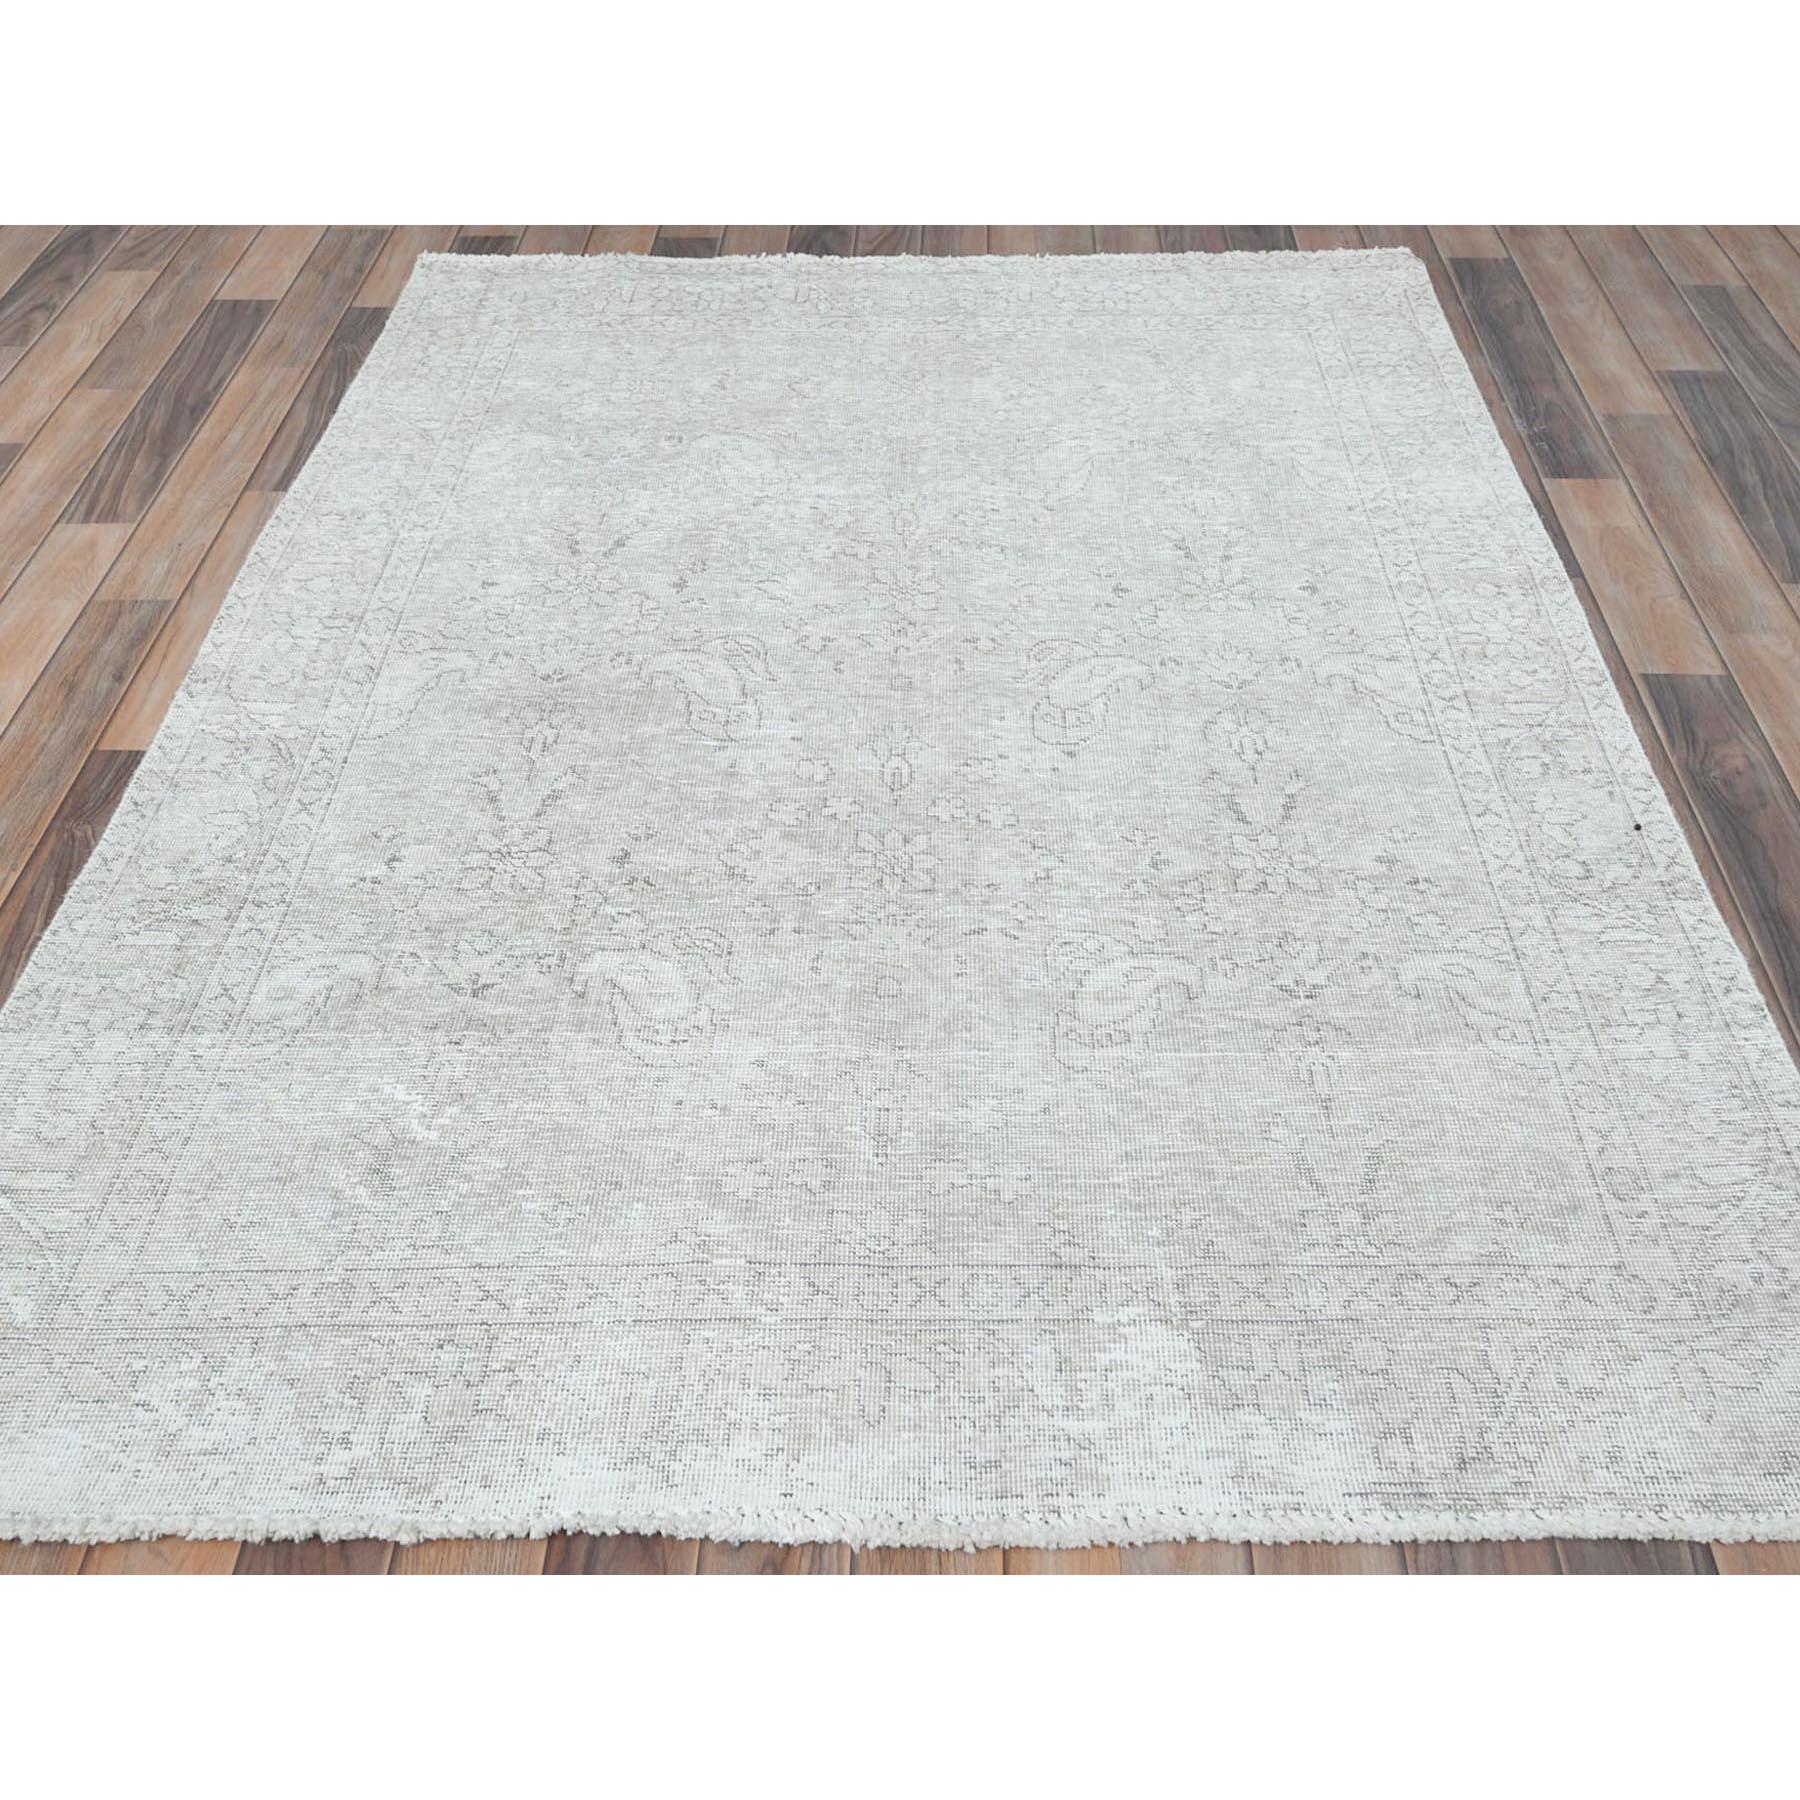 This fabulous Hand-Knotted carpet has been created and designed for extra strength and durability. This rug has been handcrafted for weeks in the traditional method that is used to make
Exact Rug Size in Feet and Inches : 4'8